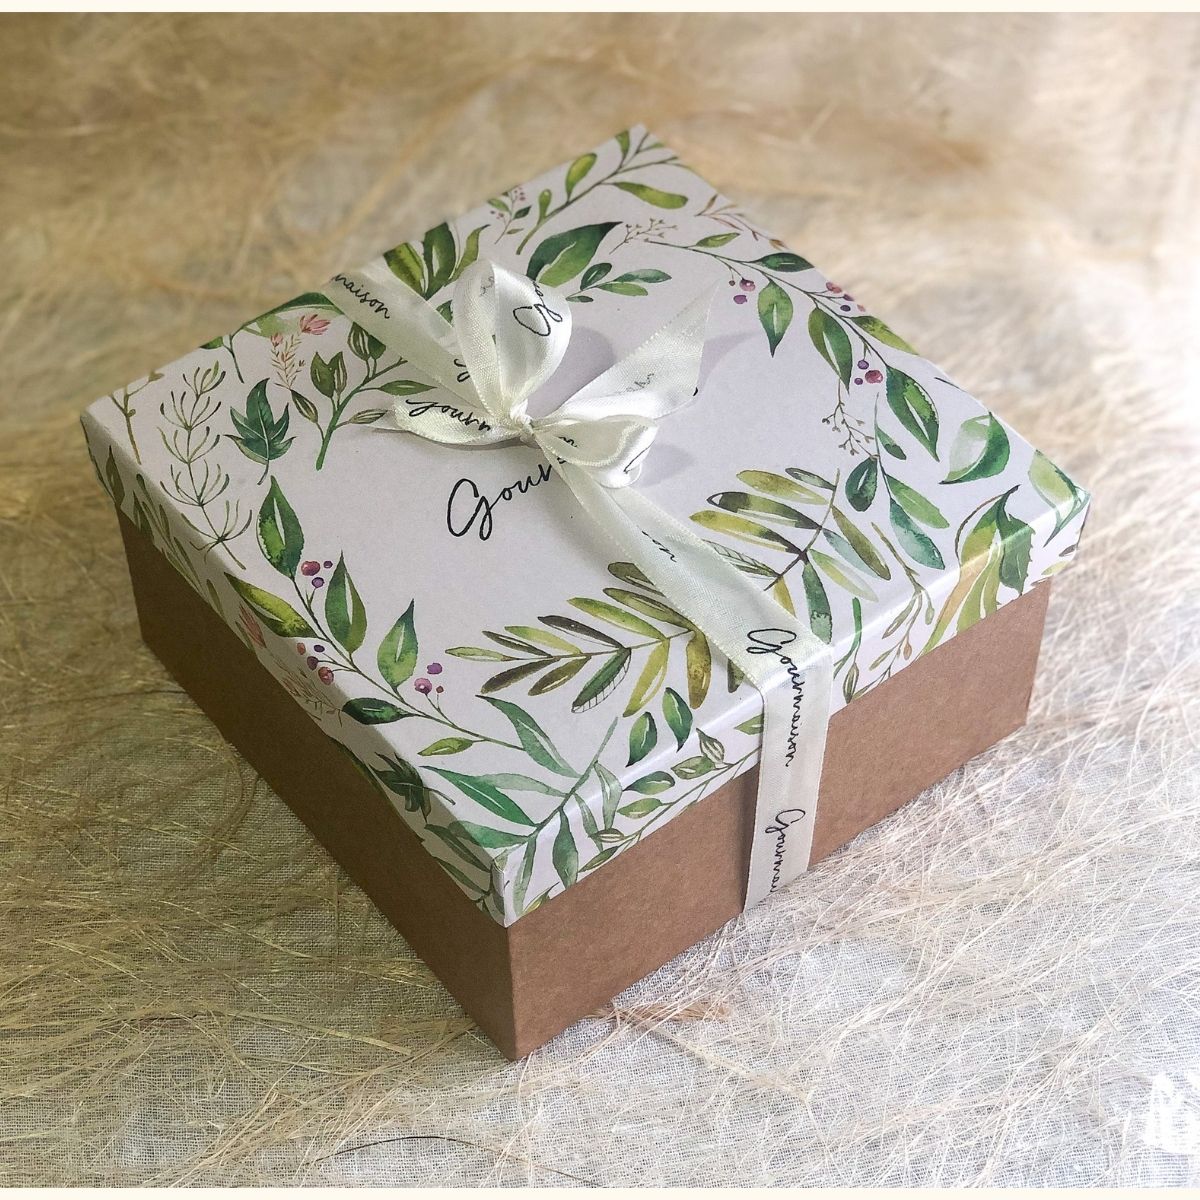 An image of a gift box that is perfect for using when gifting cheese and crackers.